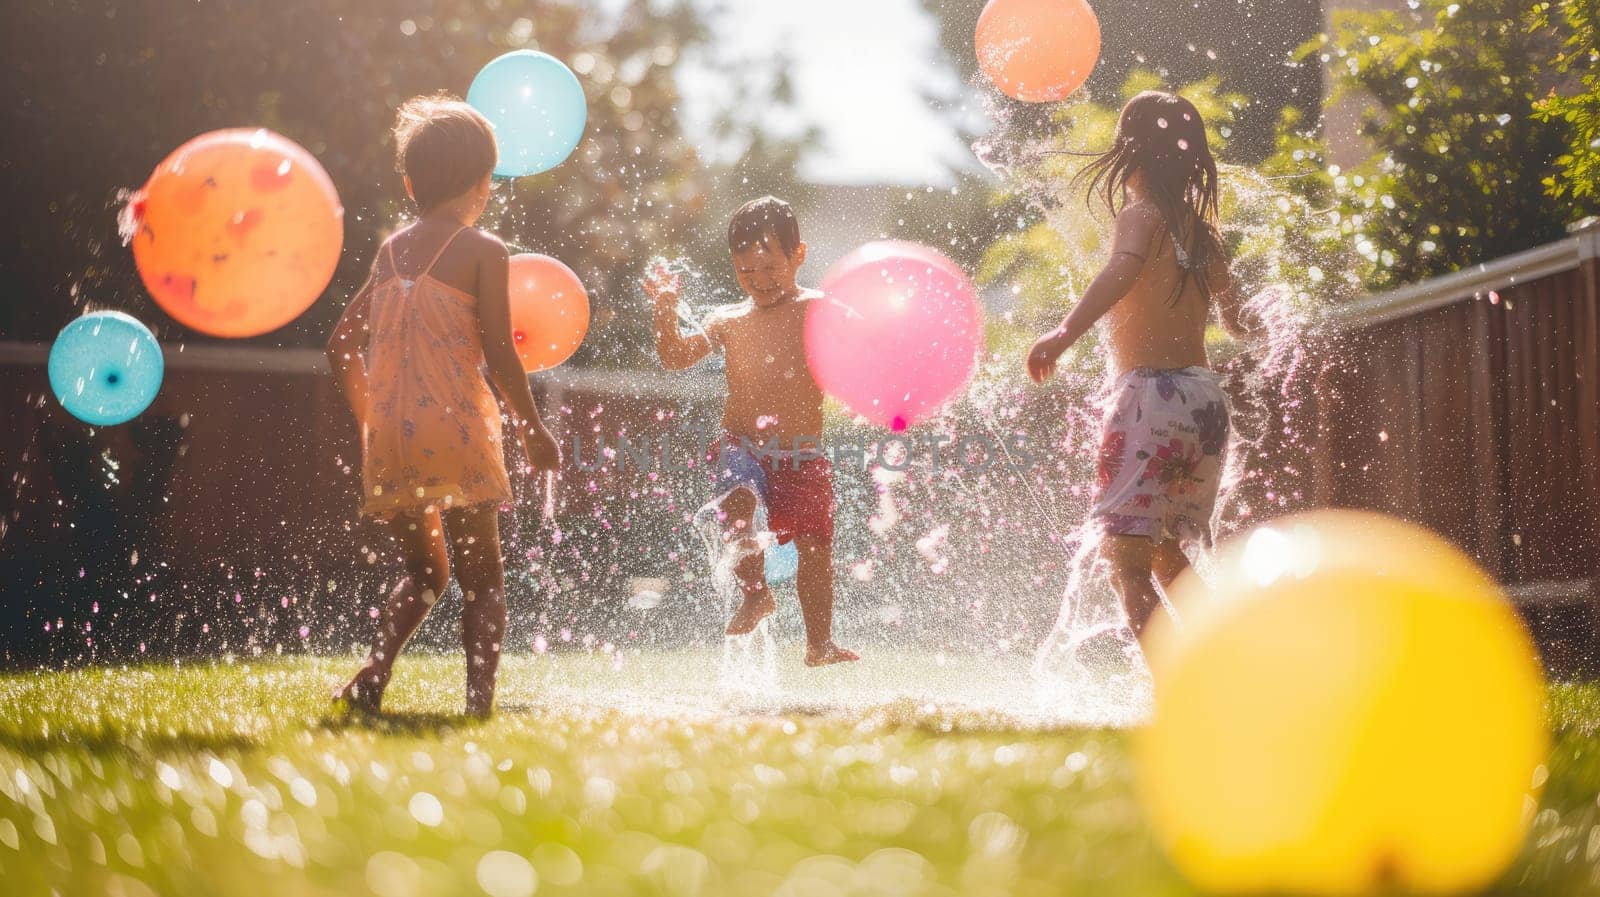 A joyful event unfolds as a group of children happily engage in a leisurely backyard activity, playing with water balloons. AIG41